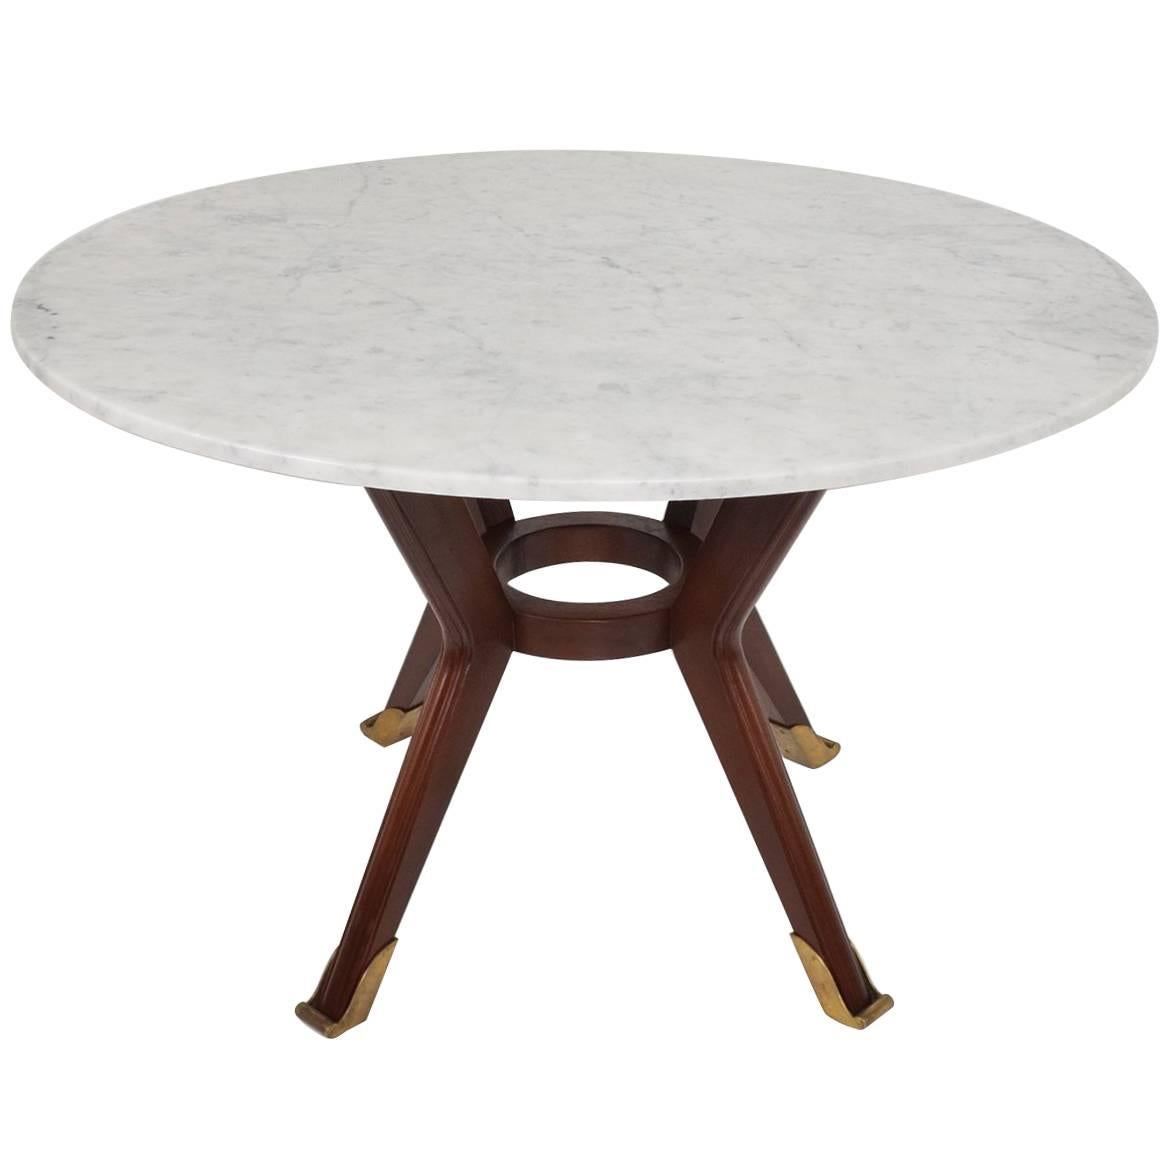 Mexican Modernist Round Dining Table Attributed to Arturo Pani